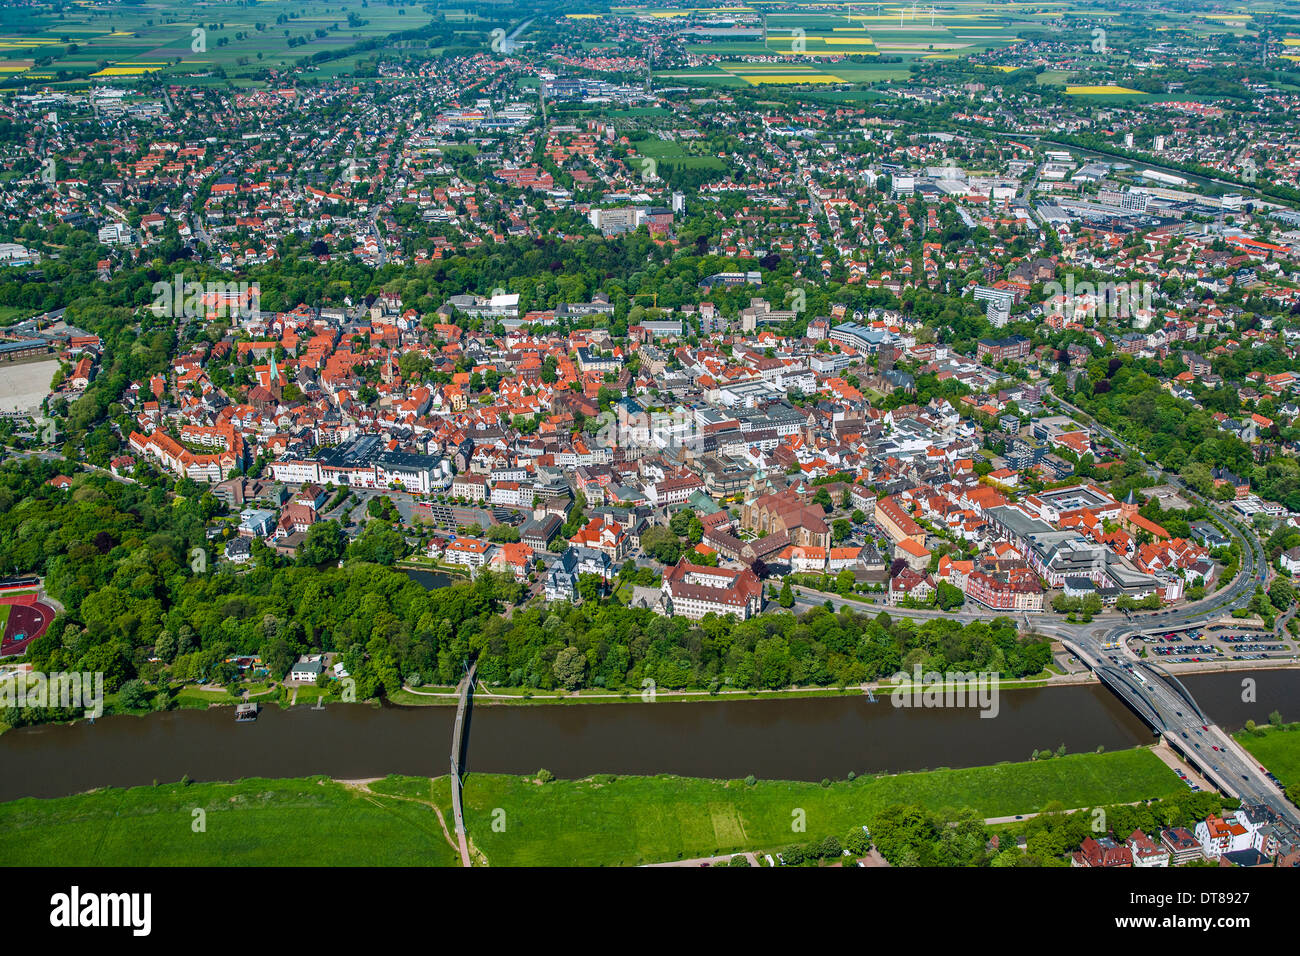 Germany, North-Rhine-Westphalia, aerial view of the Weser Renaissance style town of Minden with River Weser Stock Photo